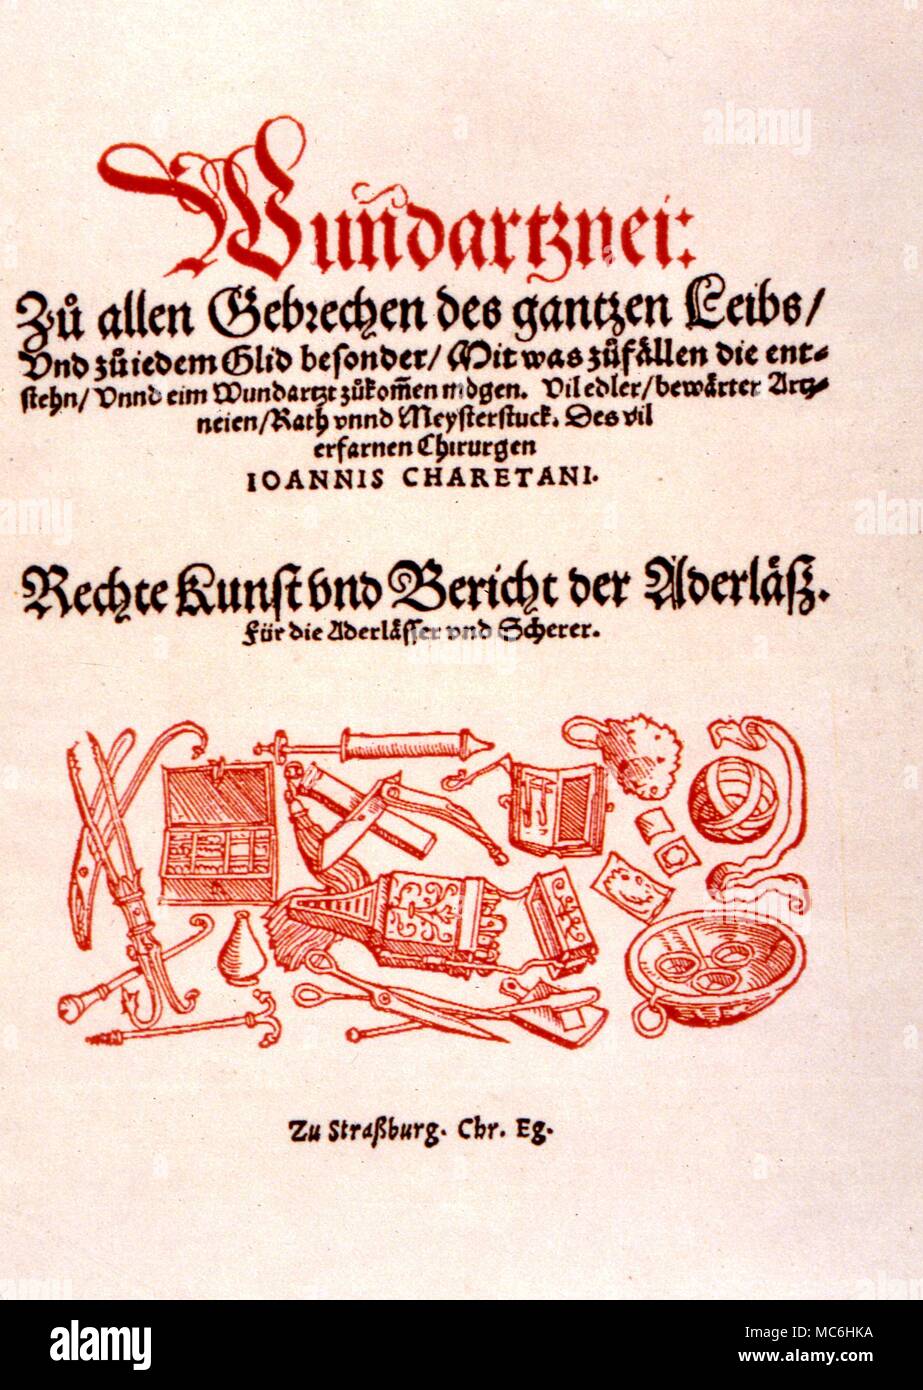 Print after the title page of Johannes Charetanus book, Wundartznei. 1531. It shows medical instruments. Stock Photo